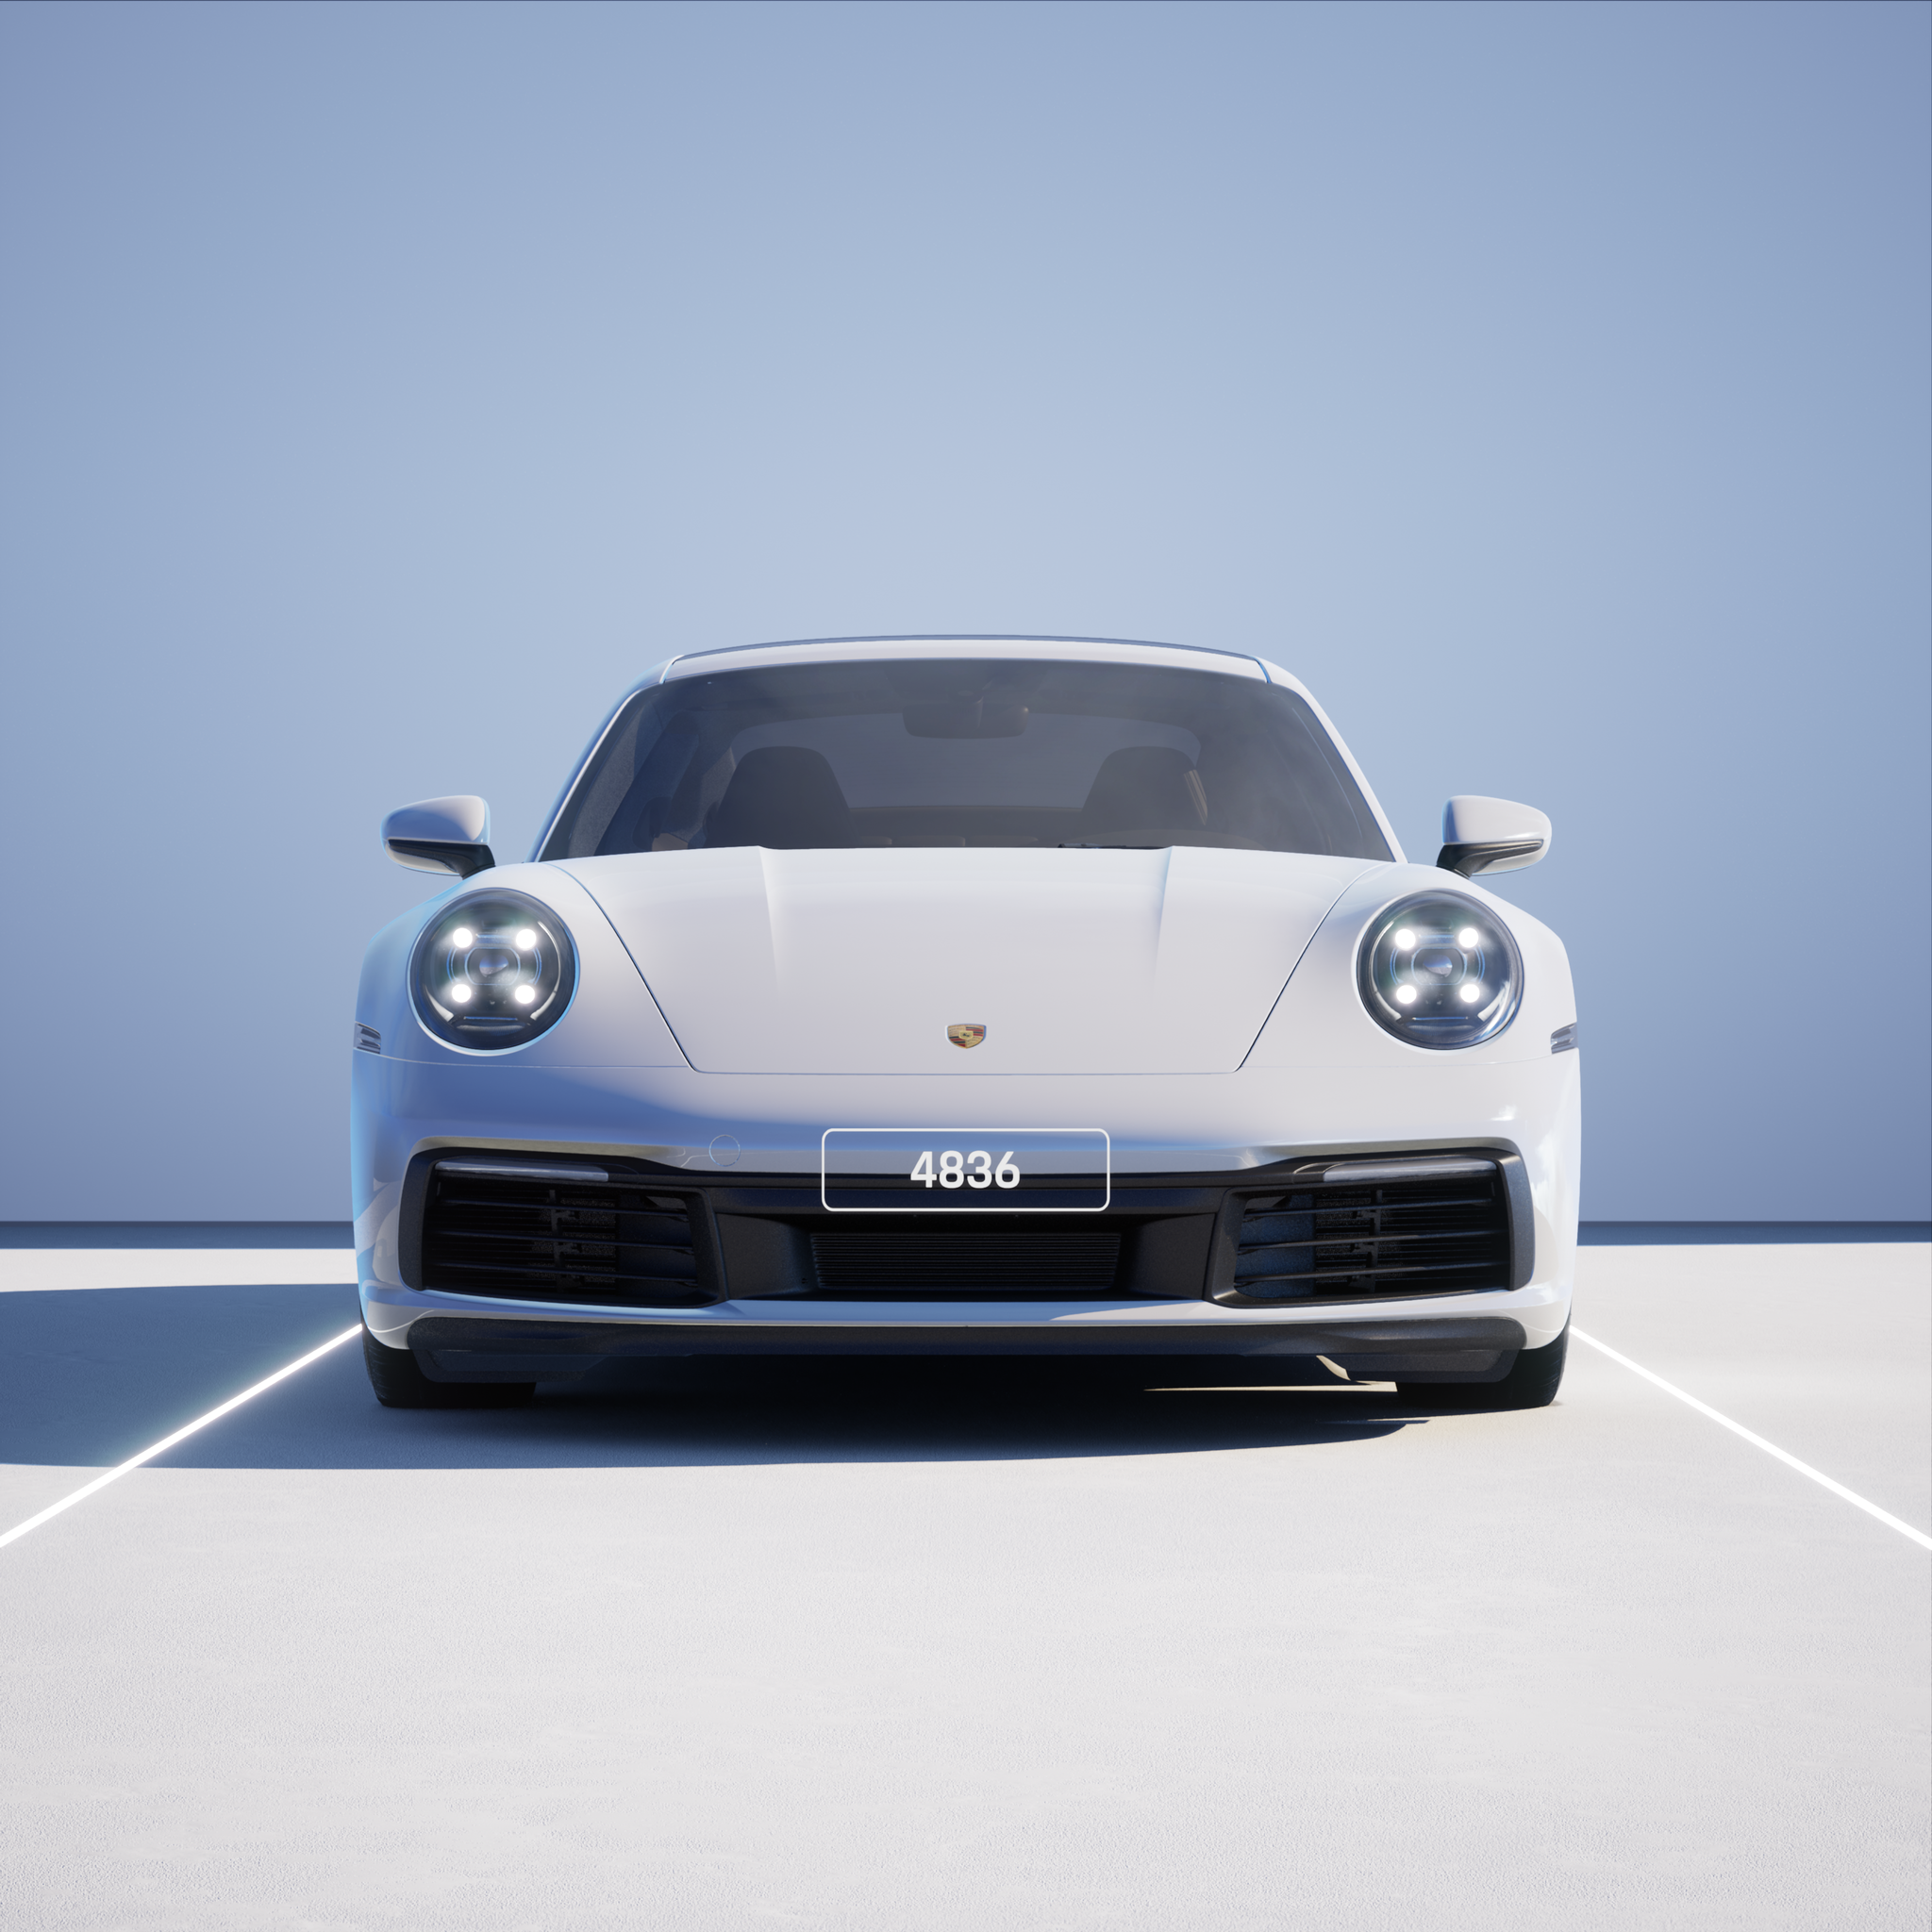 The PORSCHΞ 911 4836 image in phase